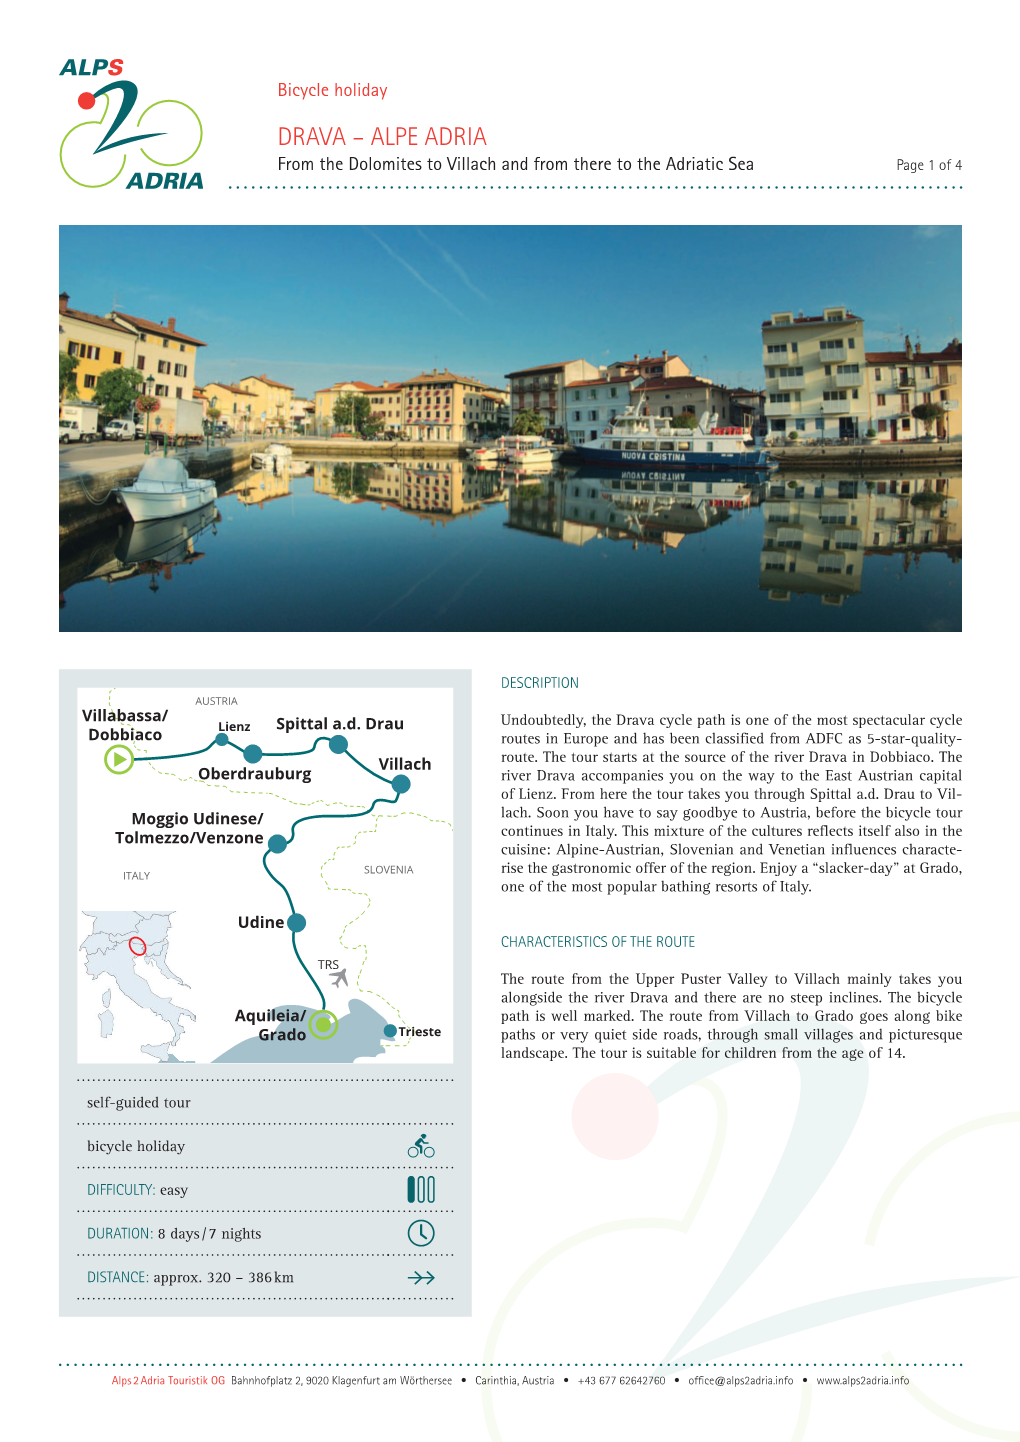 DRAVA – ALPE ADRIA from the Dolomites to Villach and from There to the Adriatic Sea Page 1 of 4